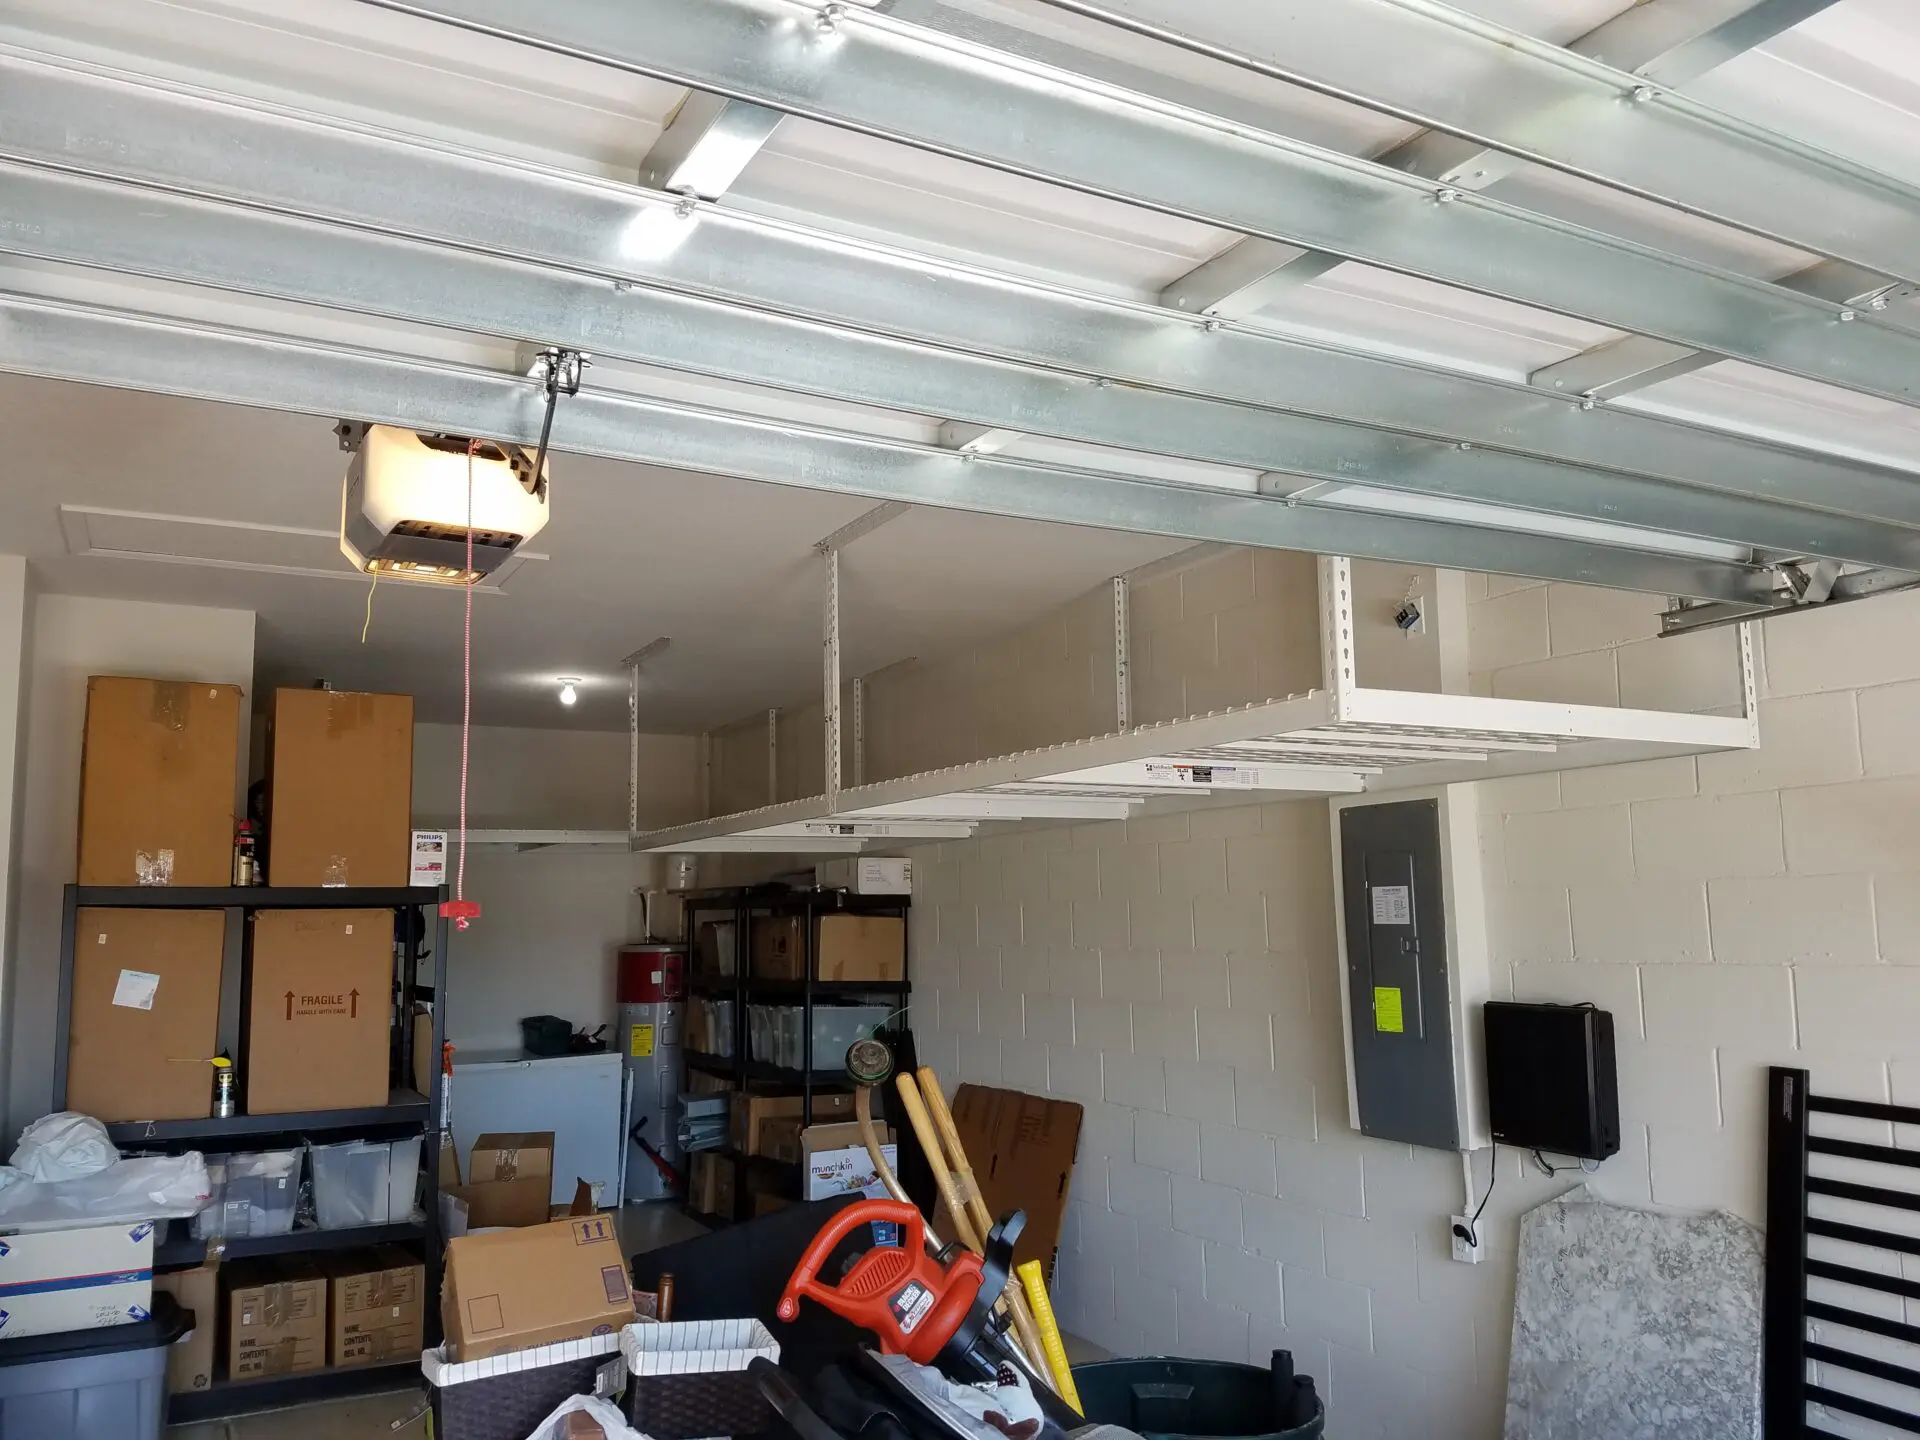 Newly installed overhead rack on one side of the garage, copy 1